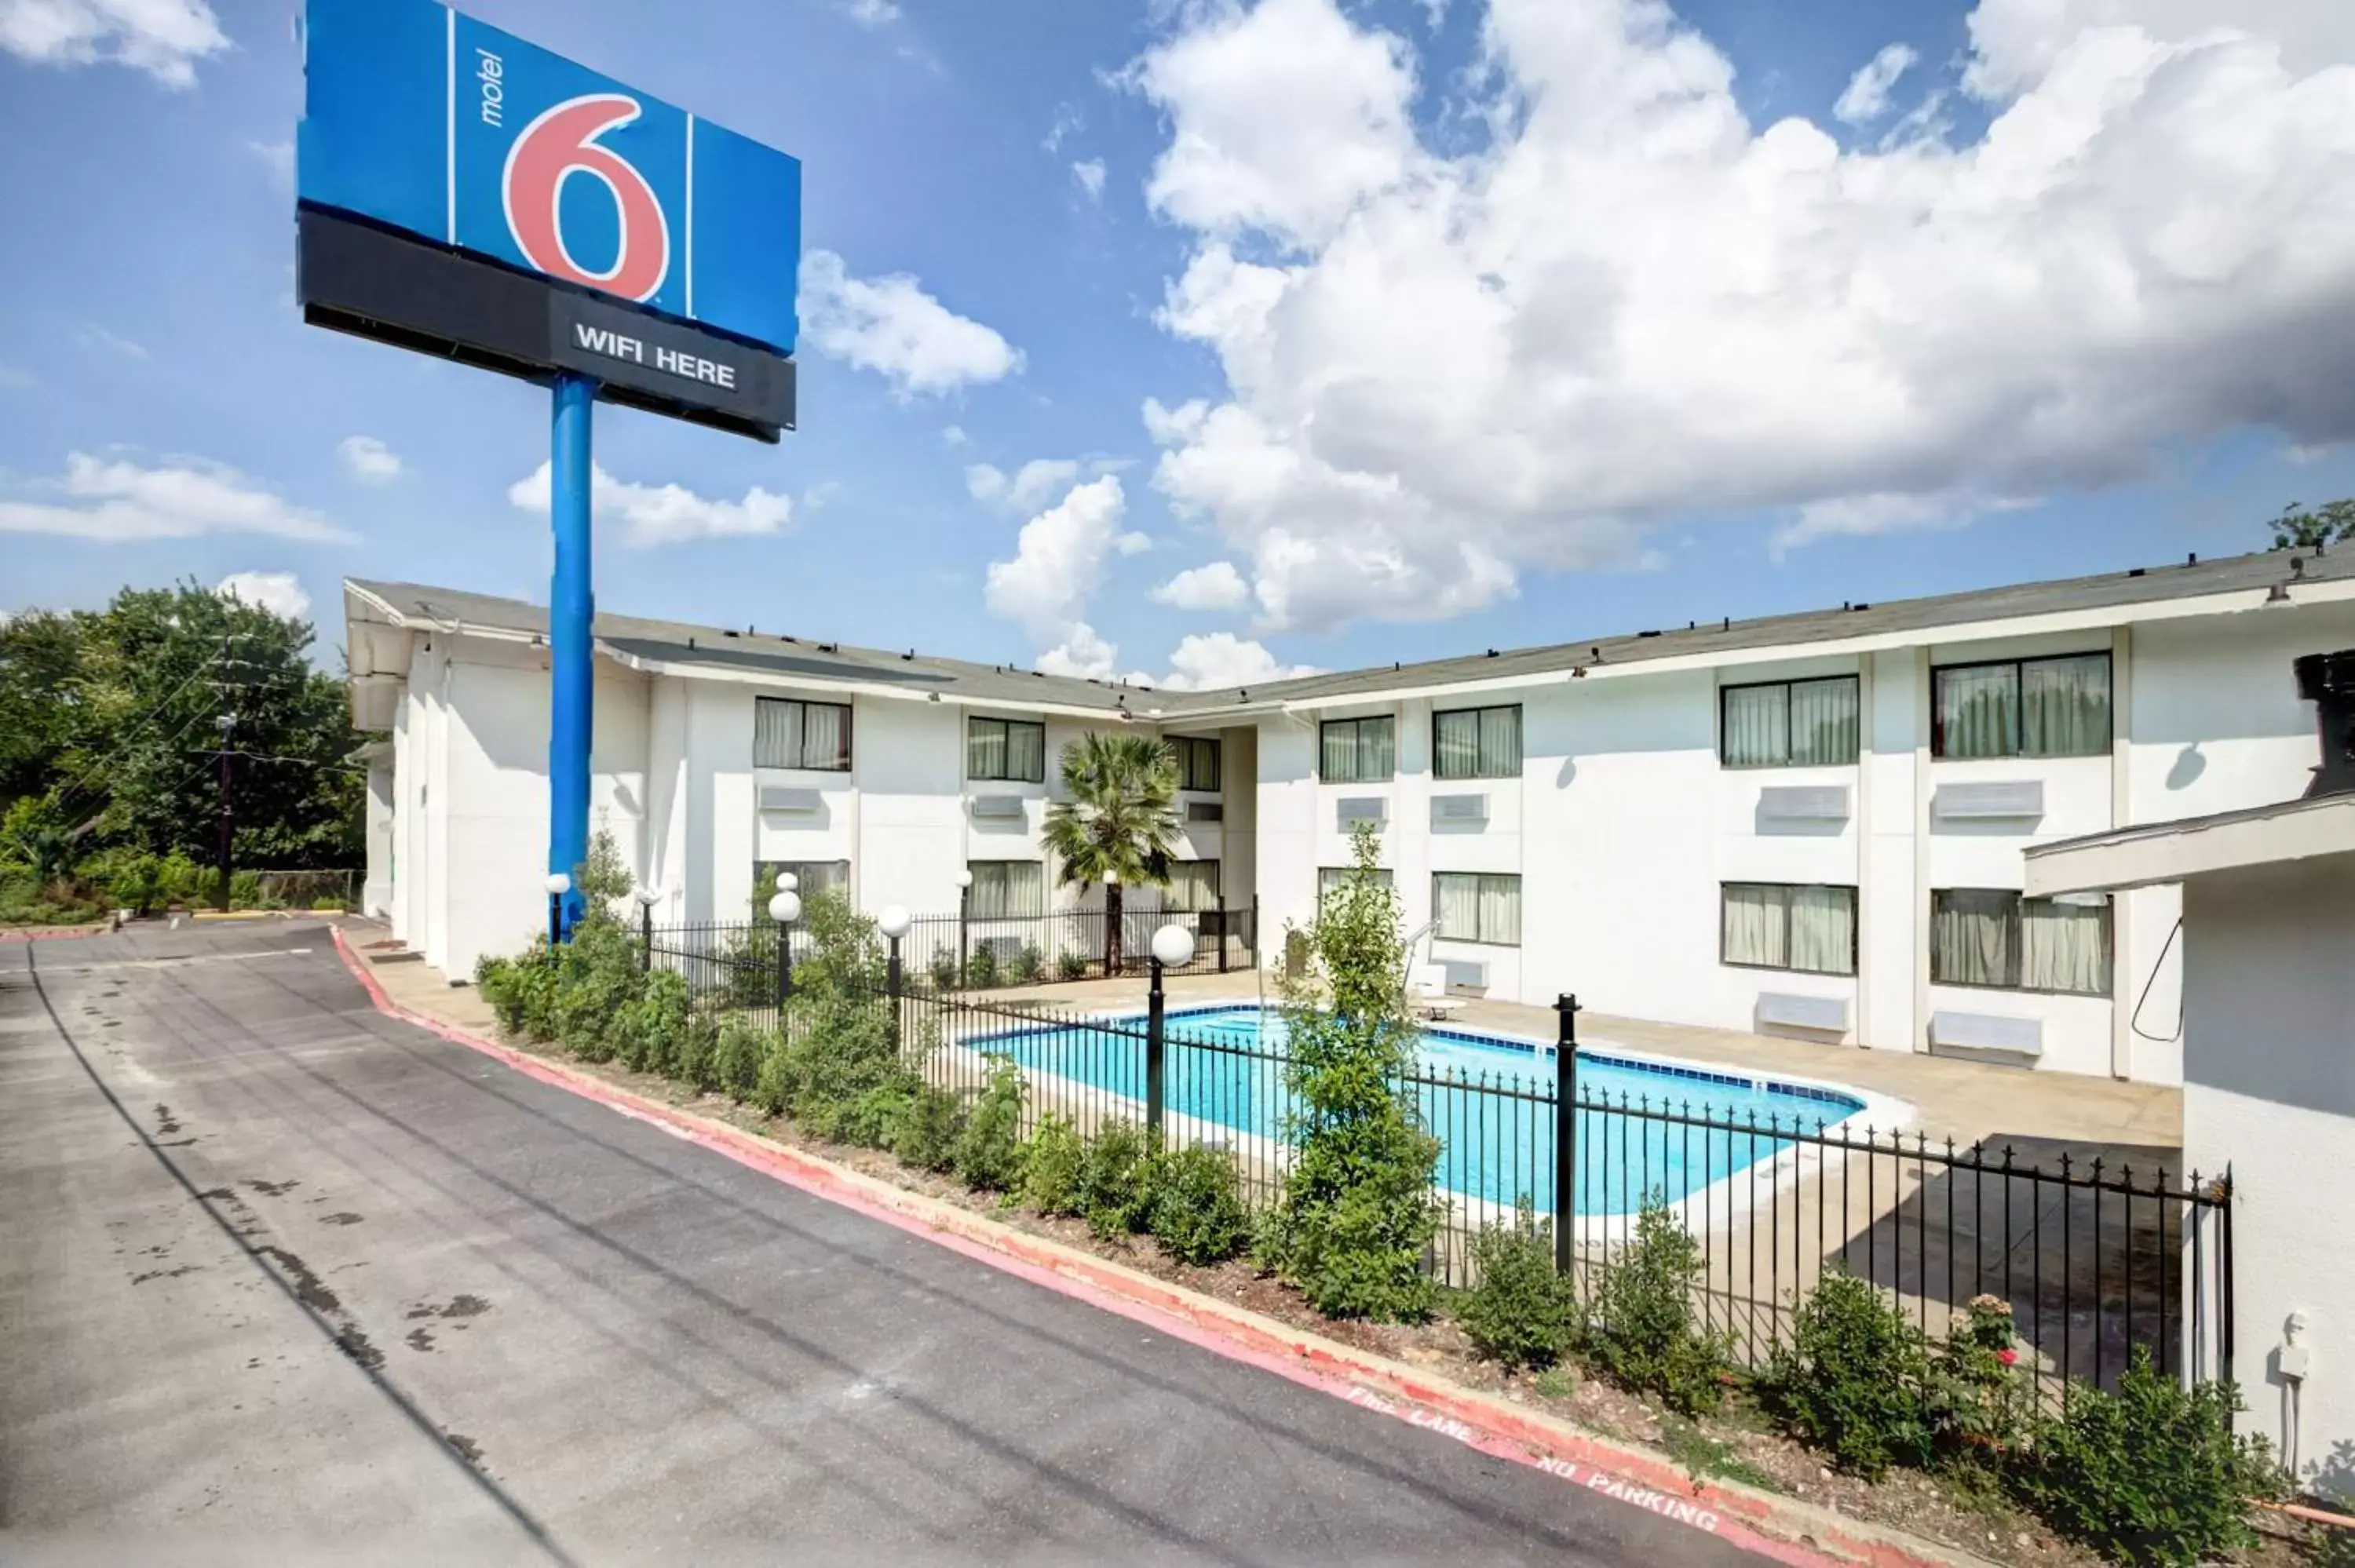 Property building, Pool View in Motel 6-Dallas, TX - South